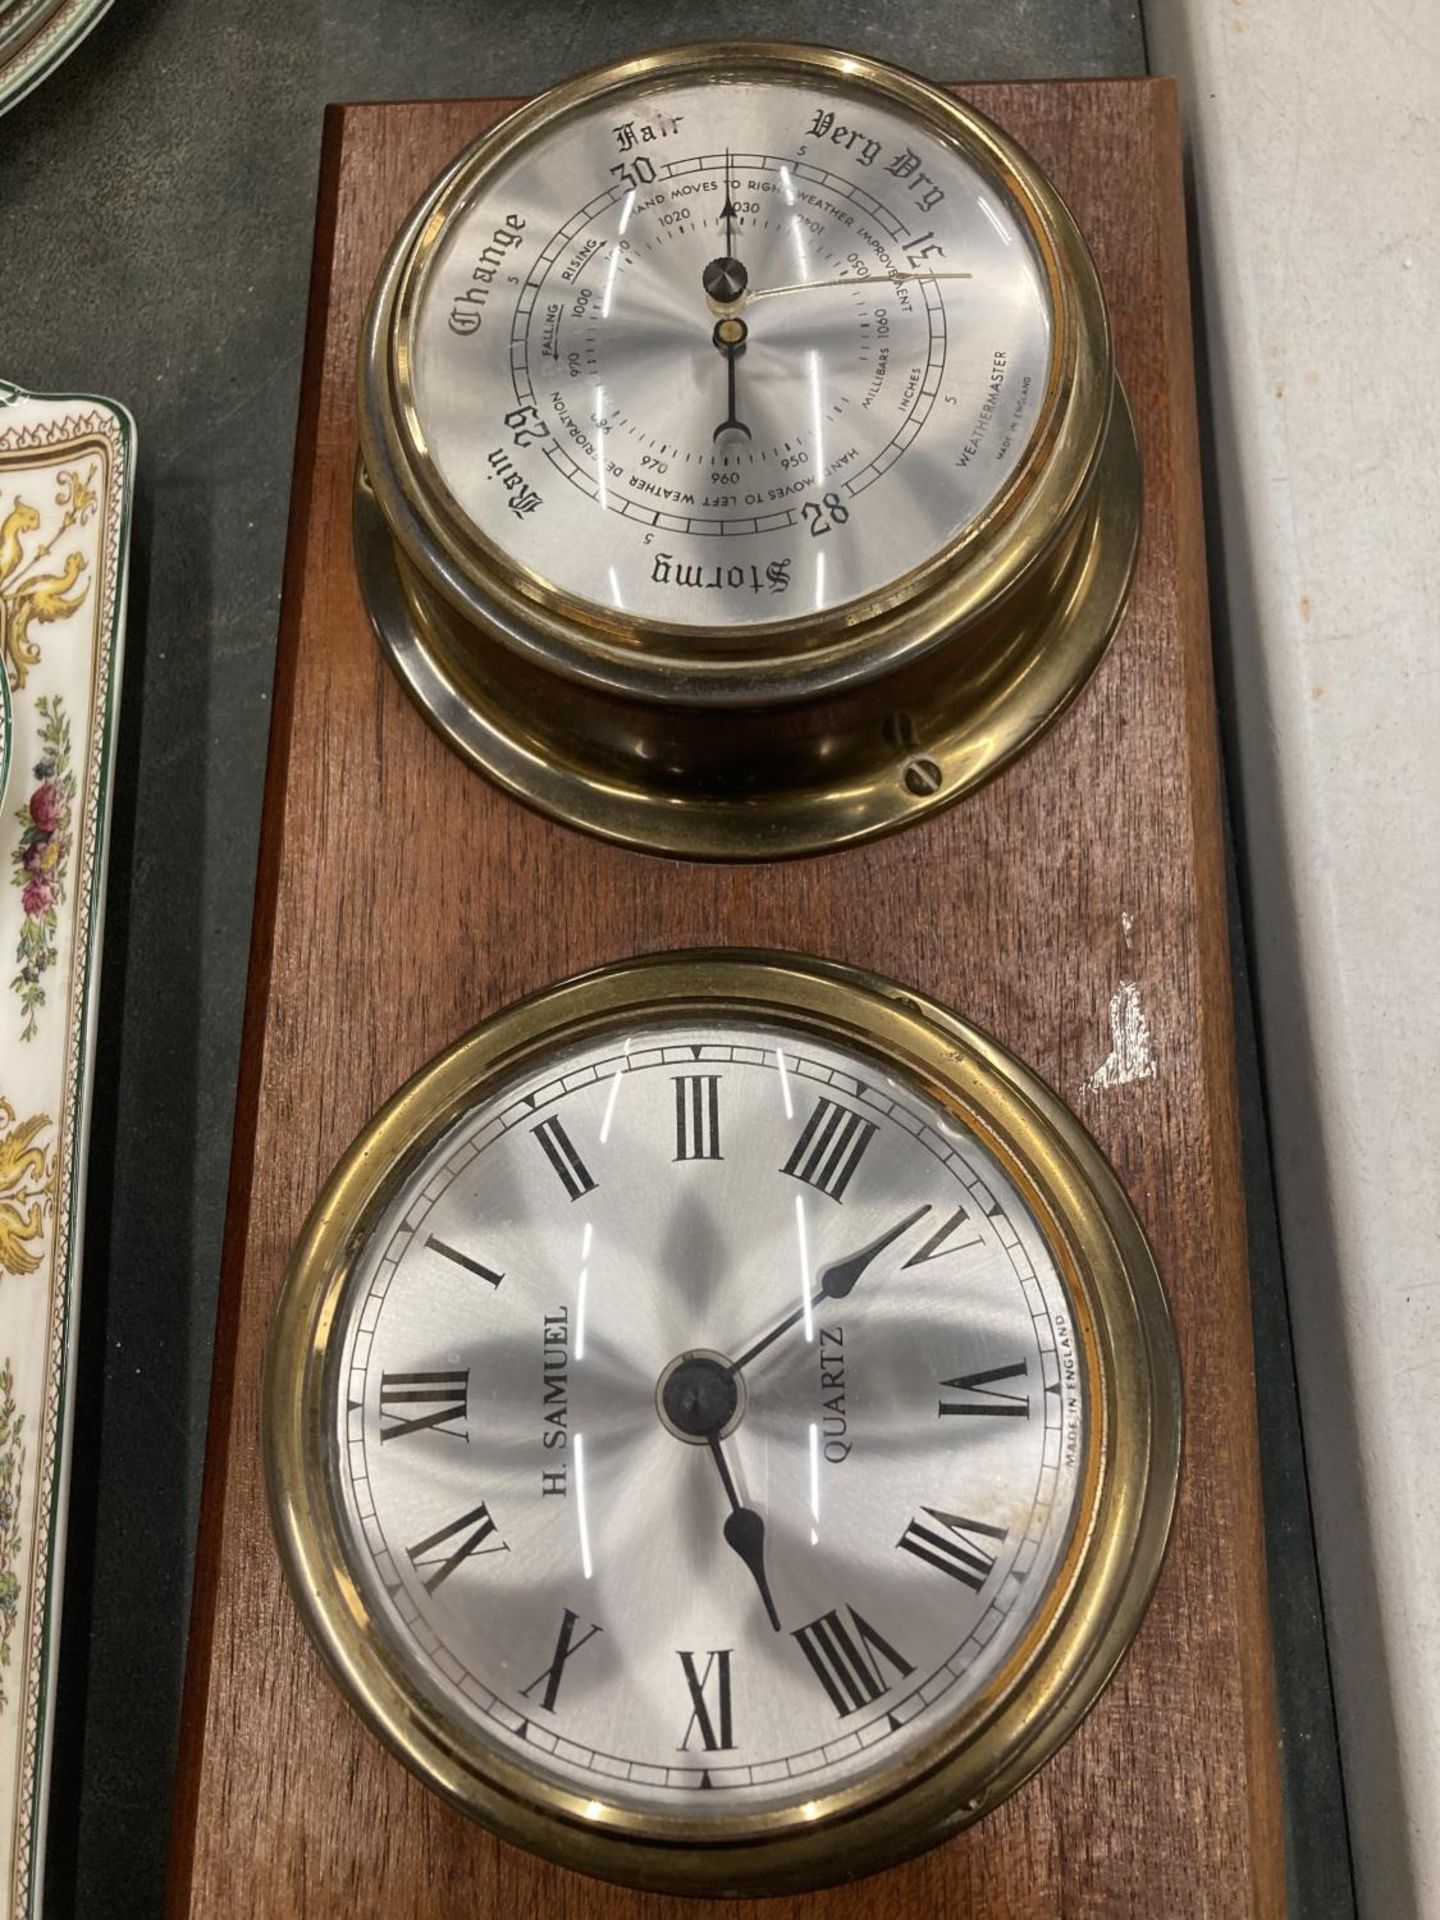 TWO BRASS BAROMETERS AND CLOCKS MOUNTED ON WOODEN PLINTHS - Image 2 of 3